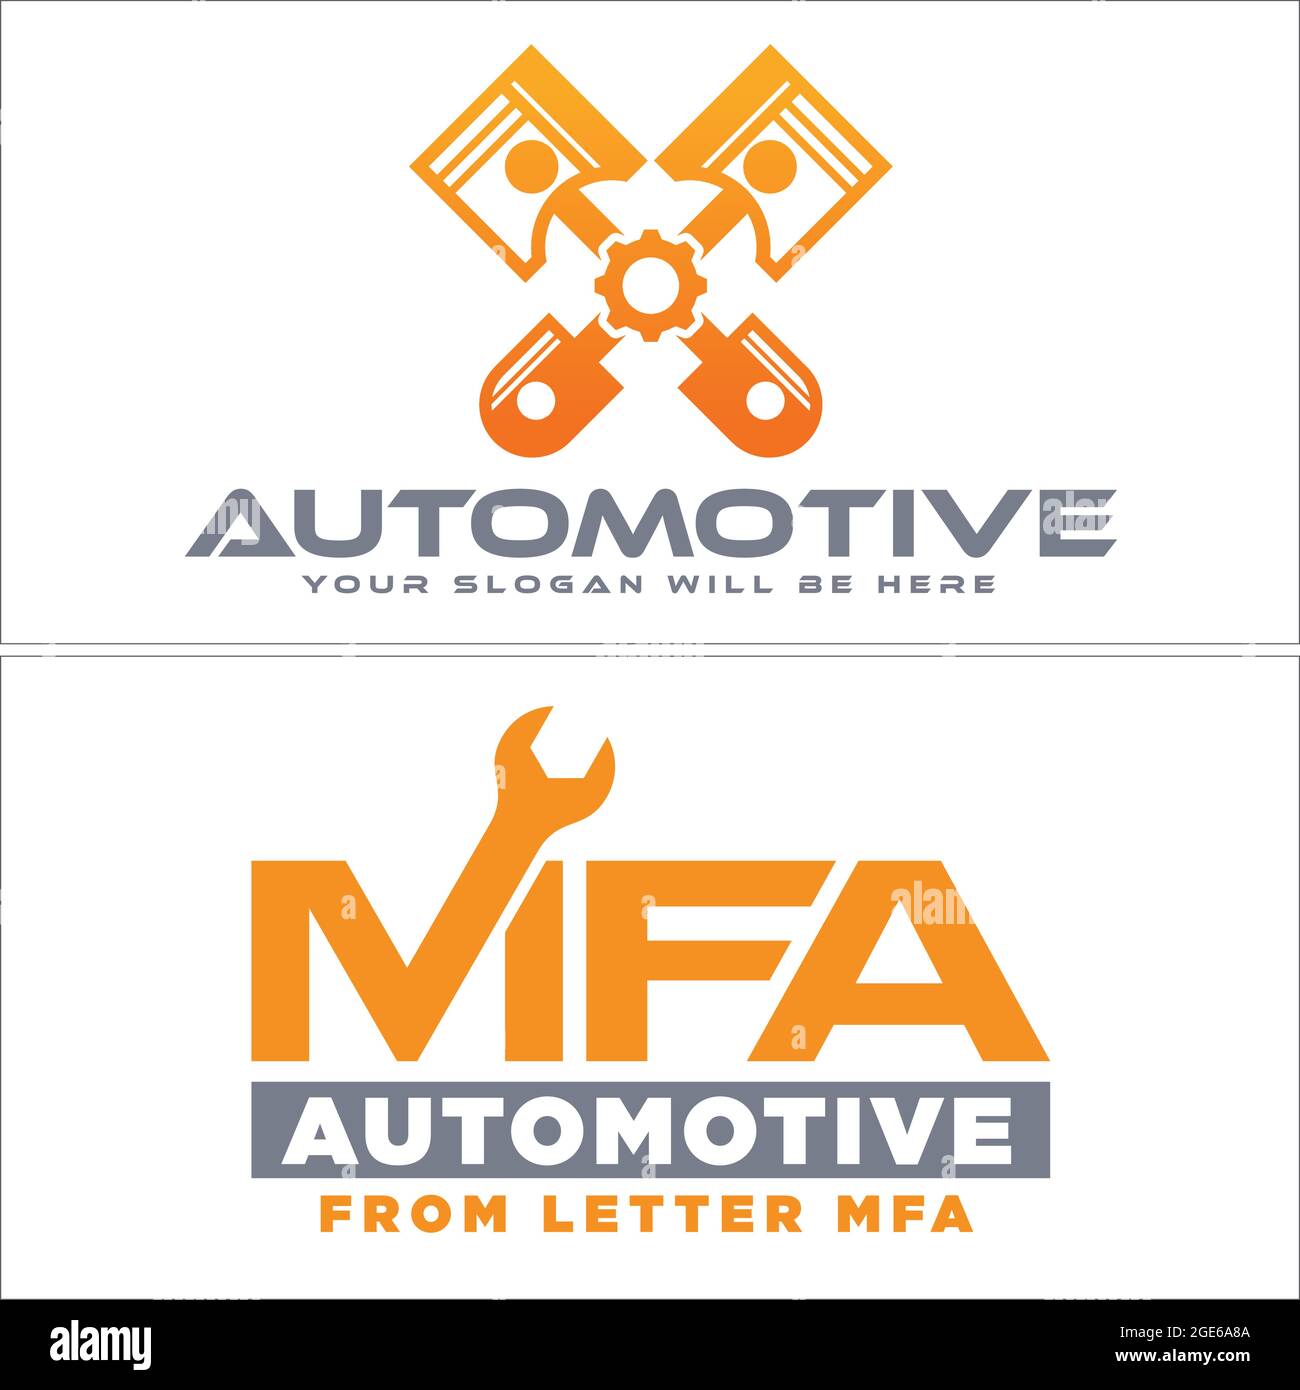 Automotive with piston and wrench symbol initial logo design  Stock Vector